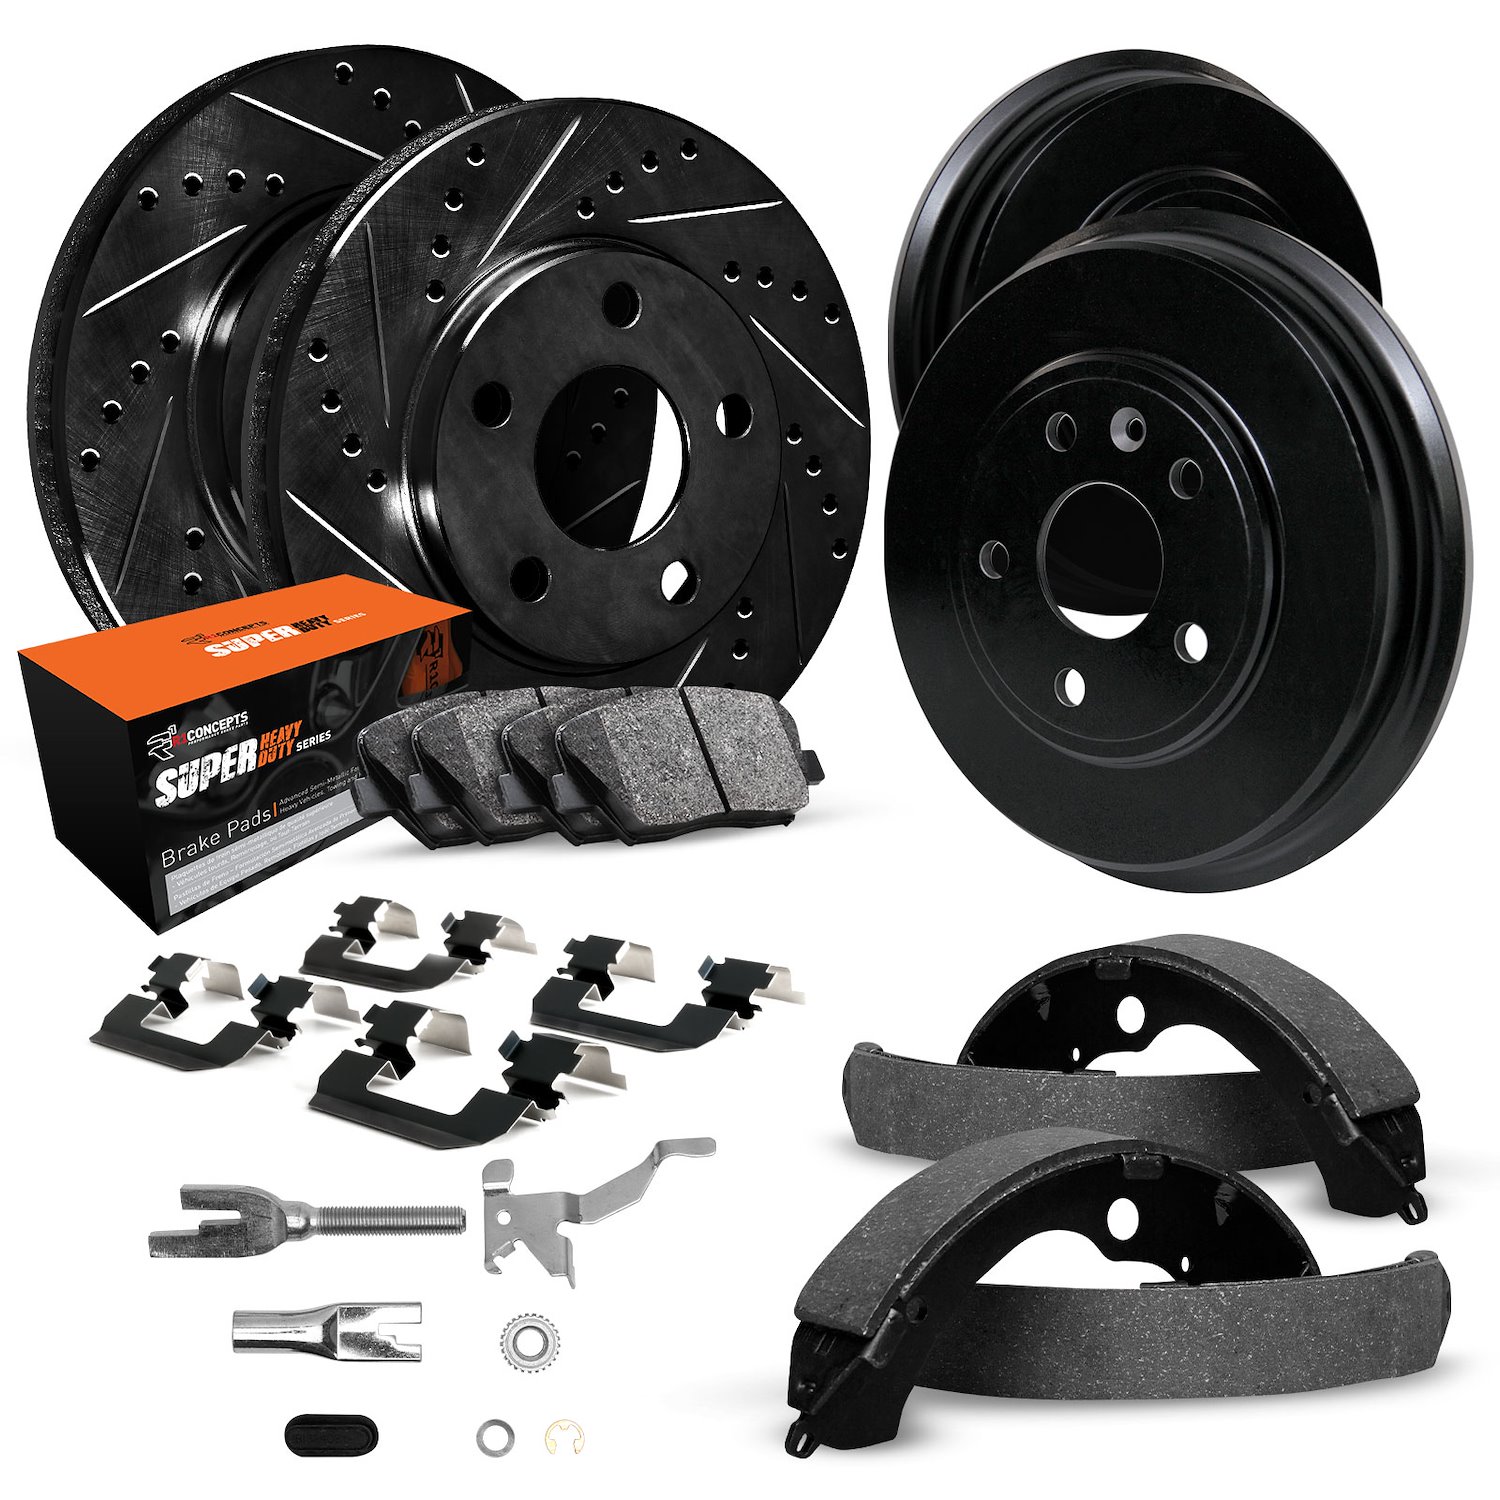 E-Line Drilled/Slotted Black Rotor & Drum Set w/Super-Duty Pads, Shoes, Hardware/Adjusters, 1981-1989 GM